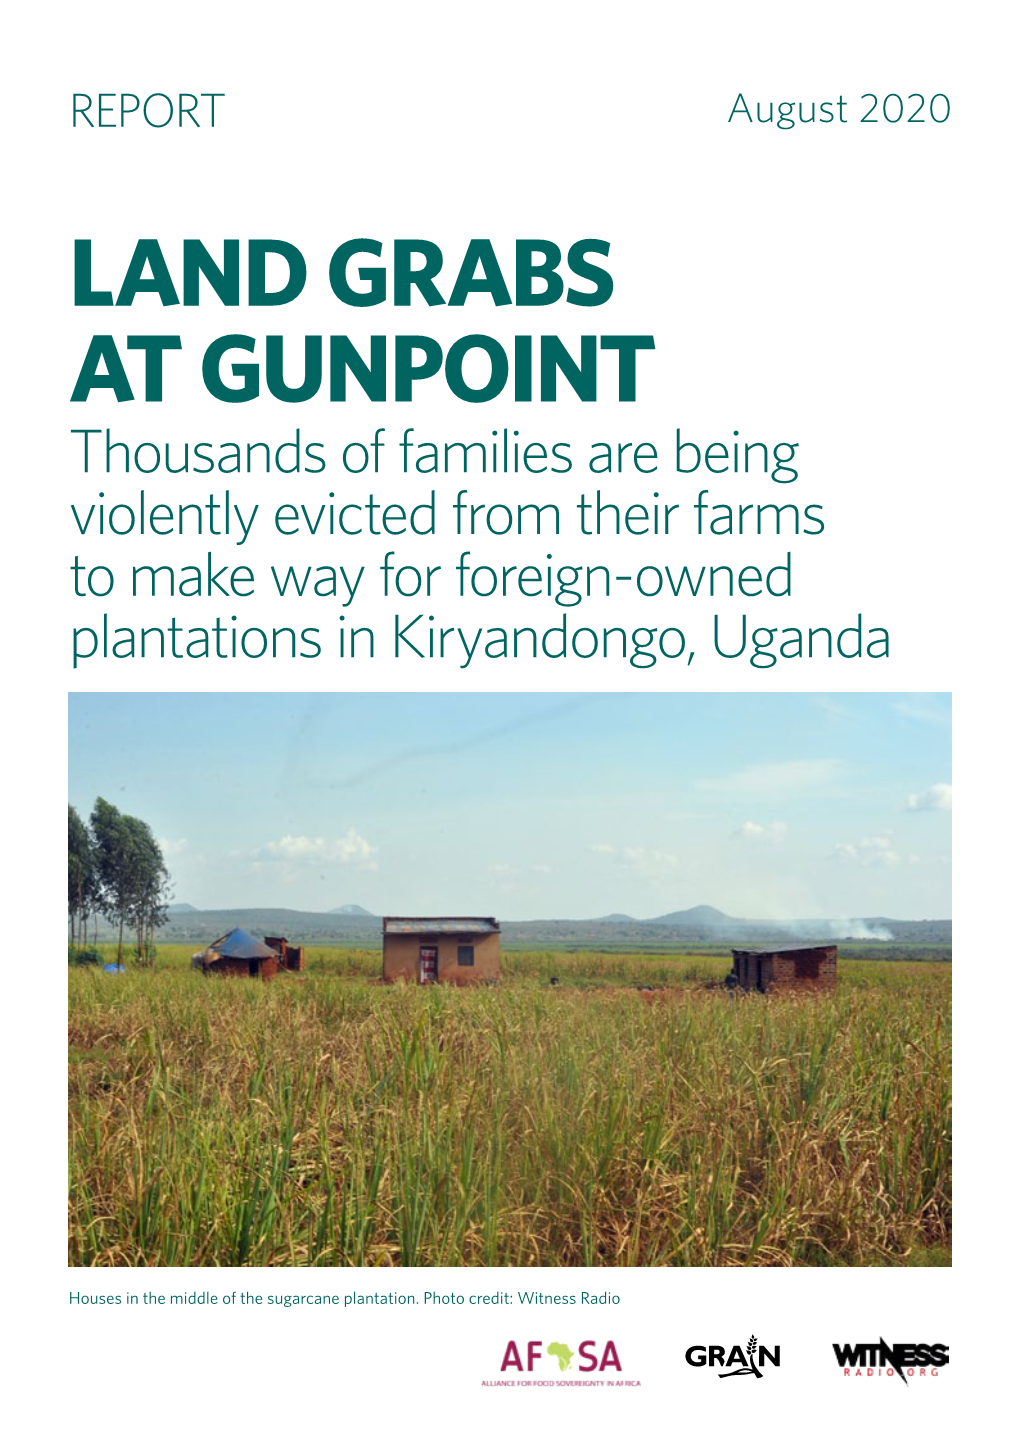 LAND GRABS at GUNPOINT Thousands of Families Are Being Violently Evicted from Their Farms to Make Way for Foreign-Owned Plantations in Kiryandongo, Uganda